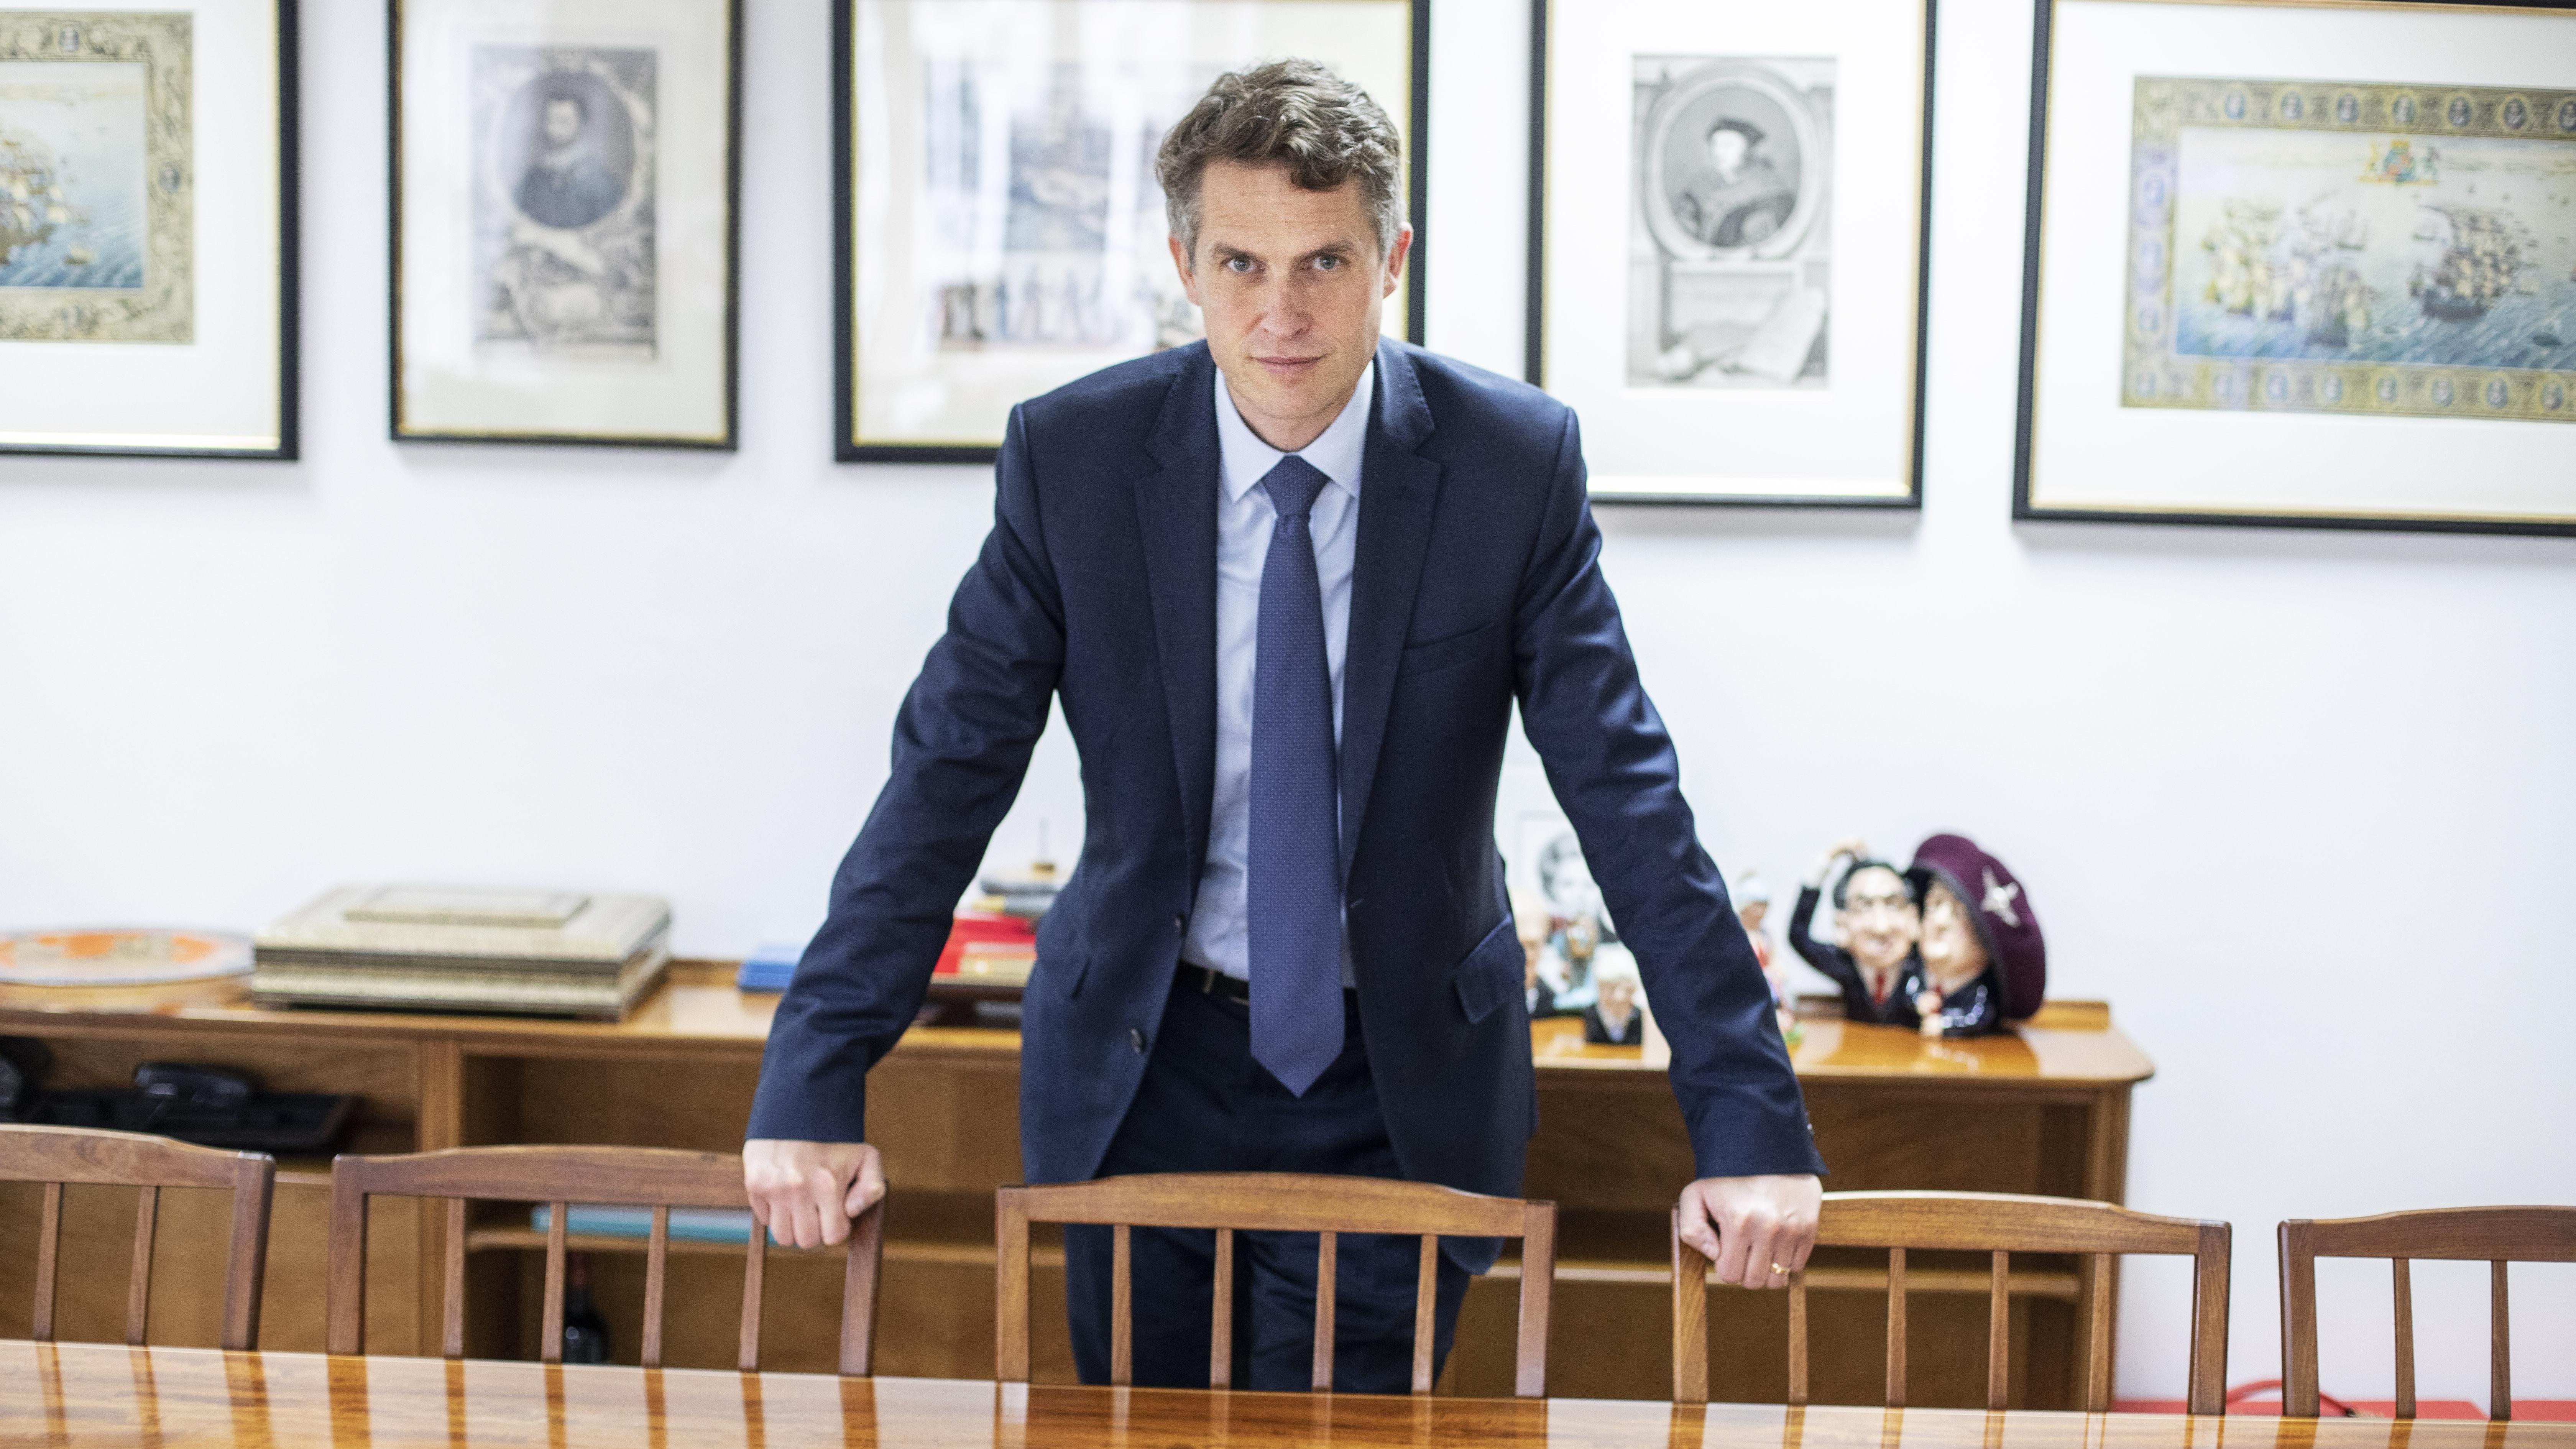 Gavin Williamson accused over threat to cancel new school - The Times